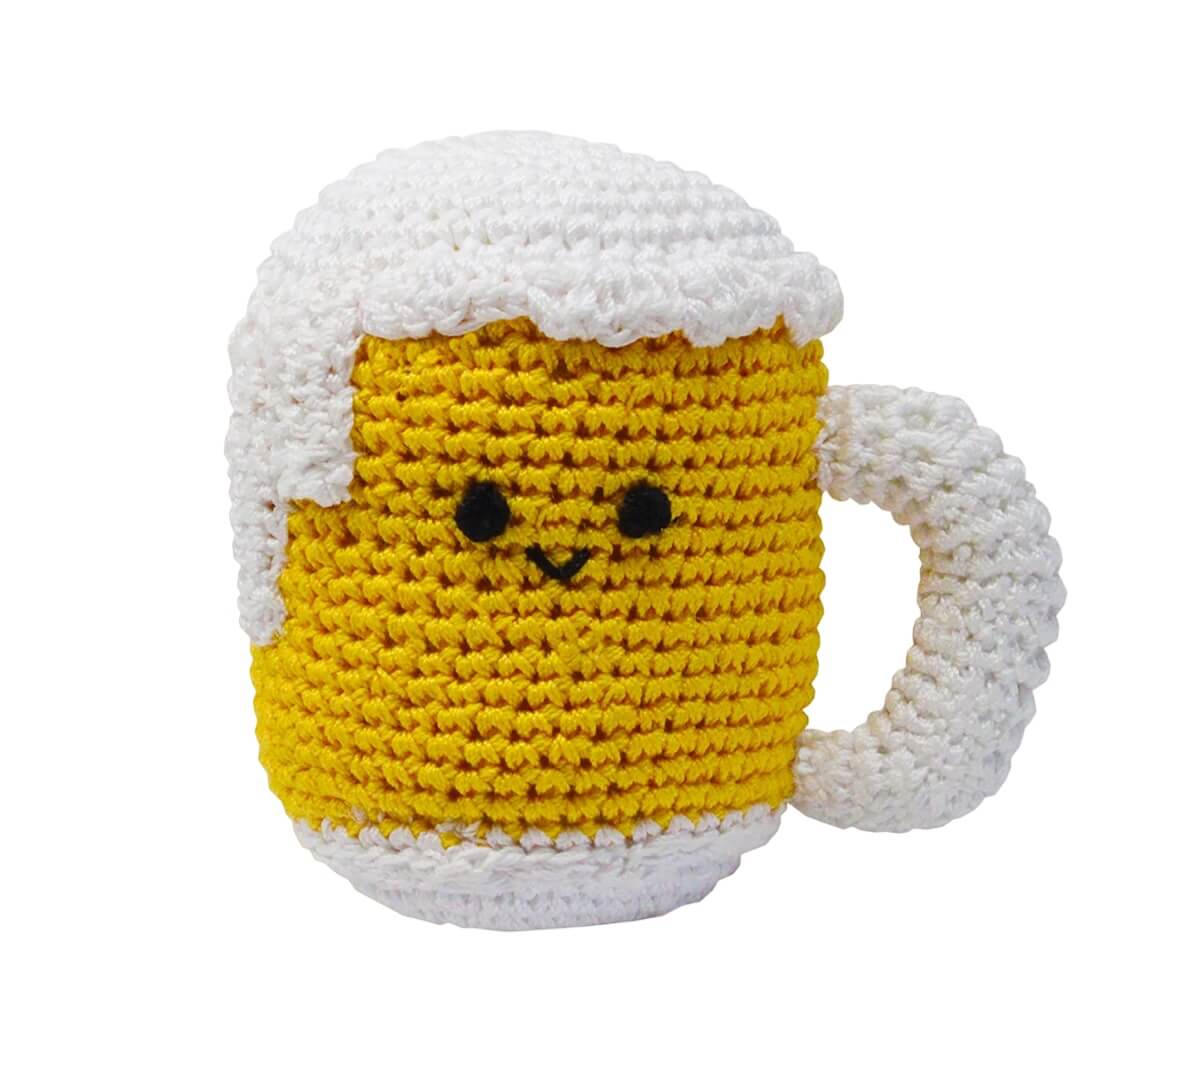 Knit Knacks "Mugsy the Beer Mug" handmade organic cotton dog toy. Anthropomorphic beer mug with a happy face, foam on its head, and a white handle.